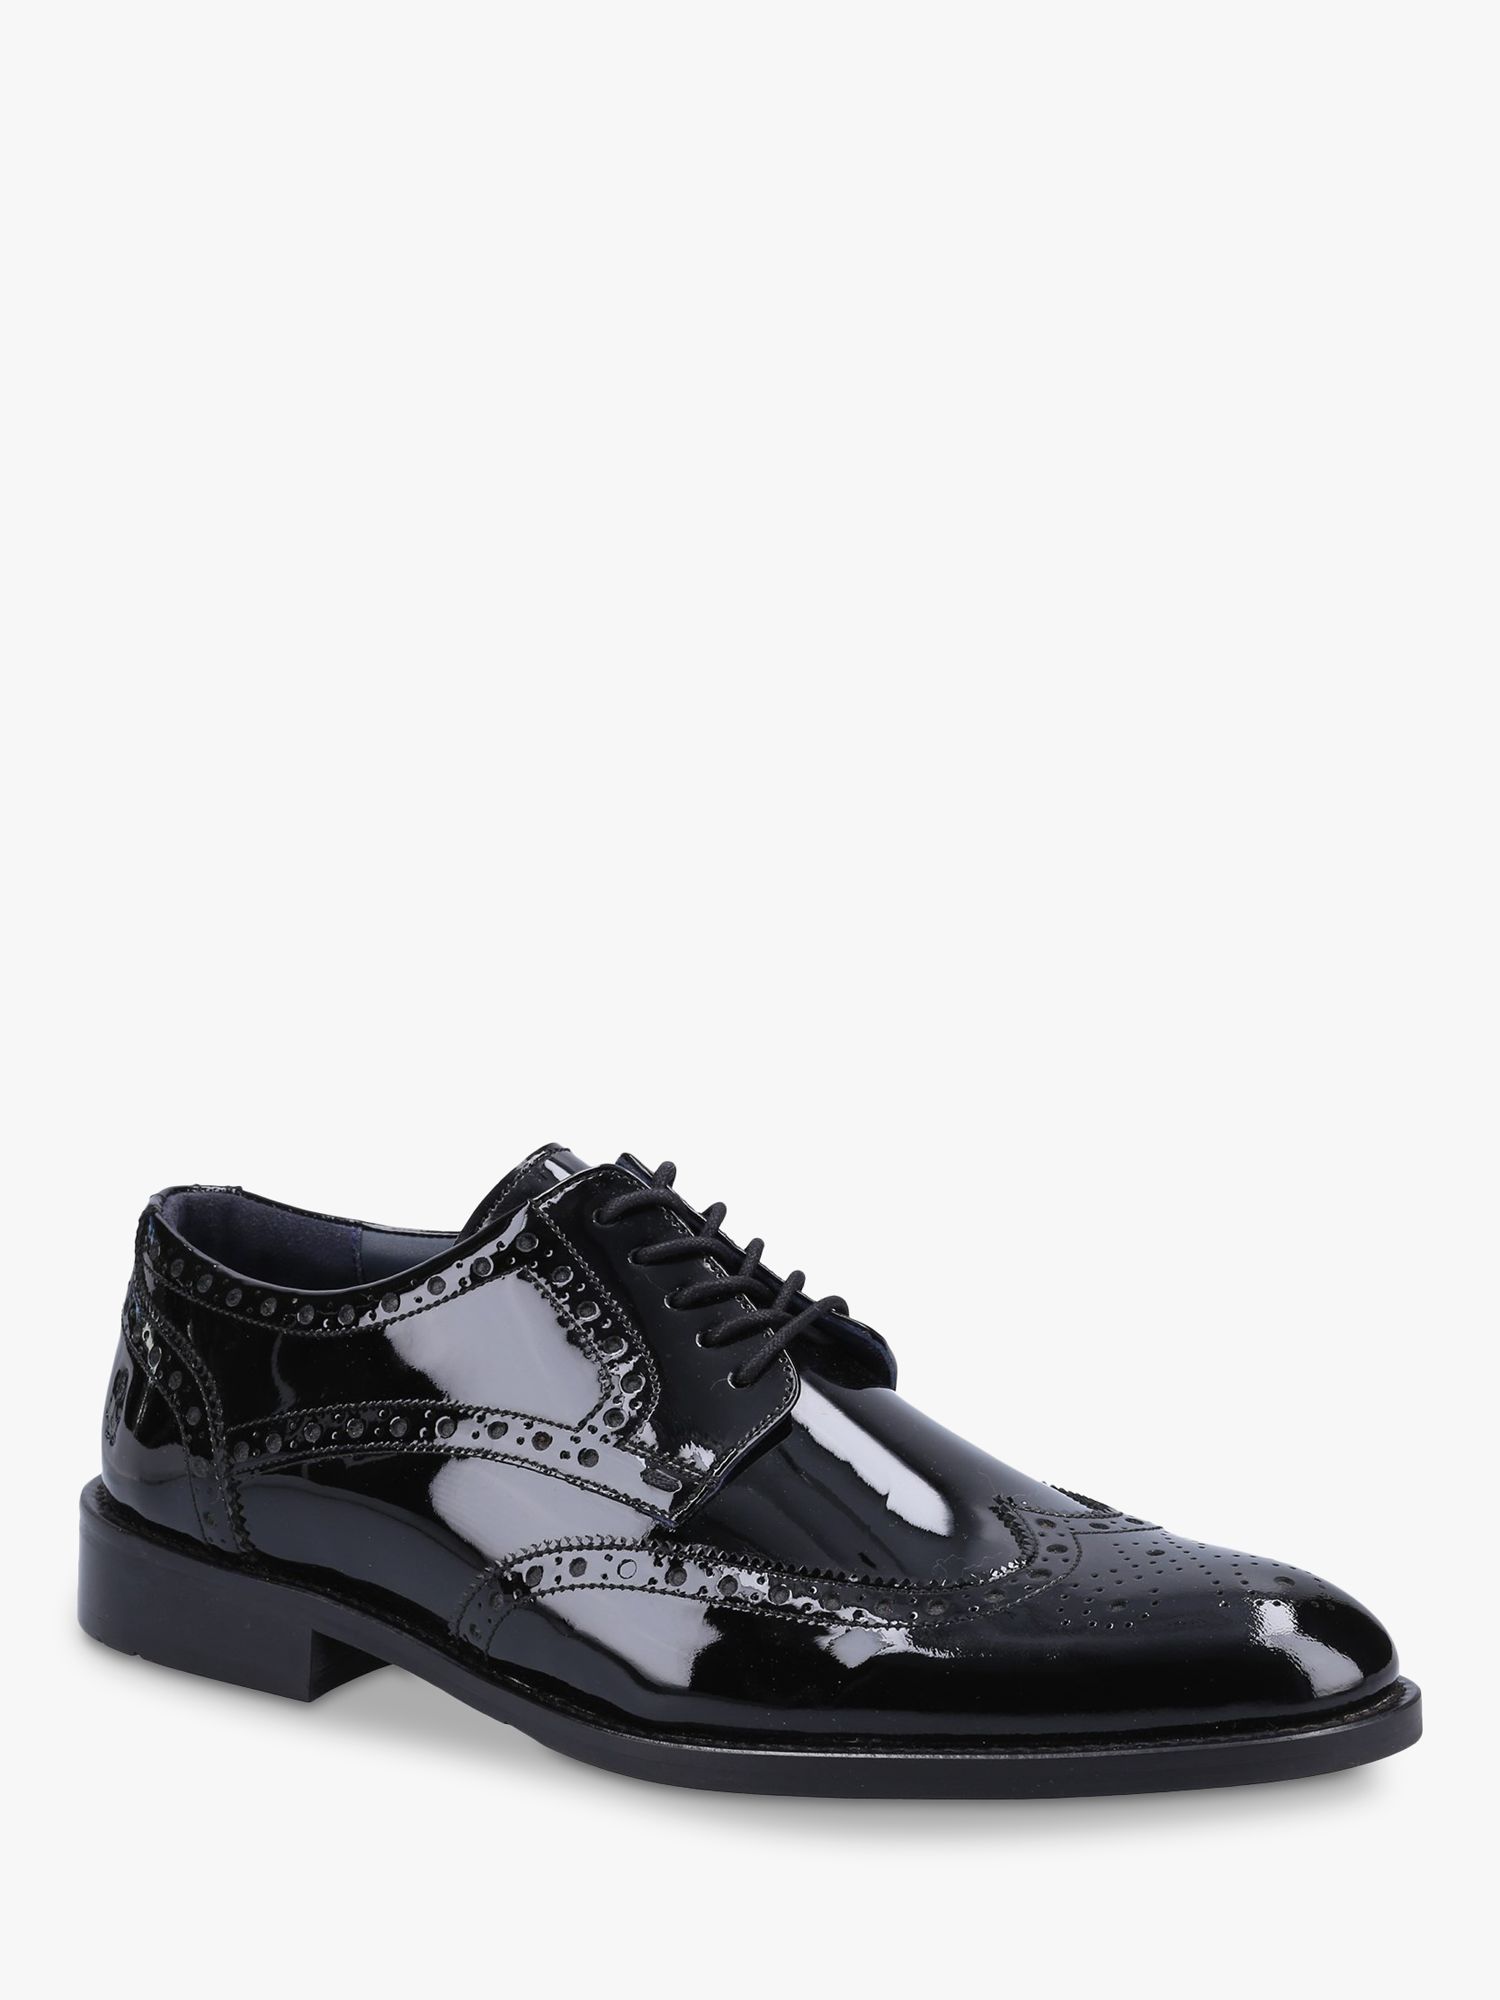 Hush Puppies Dustin Patent Leather Brogues, Black, 6